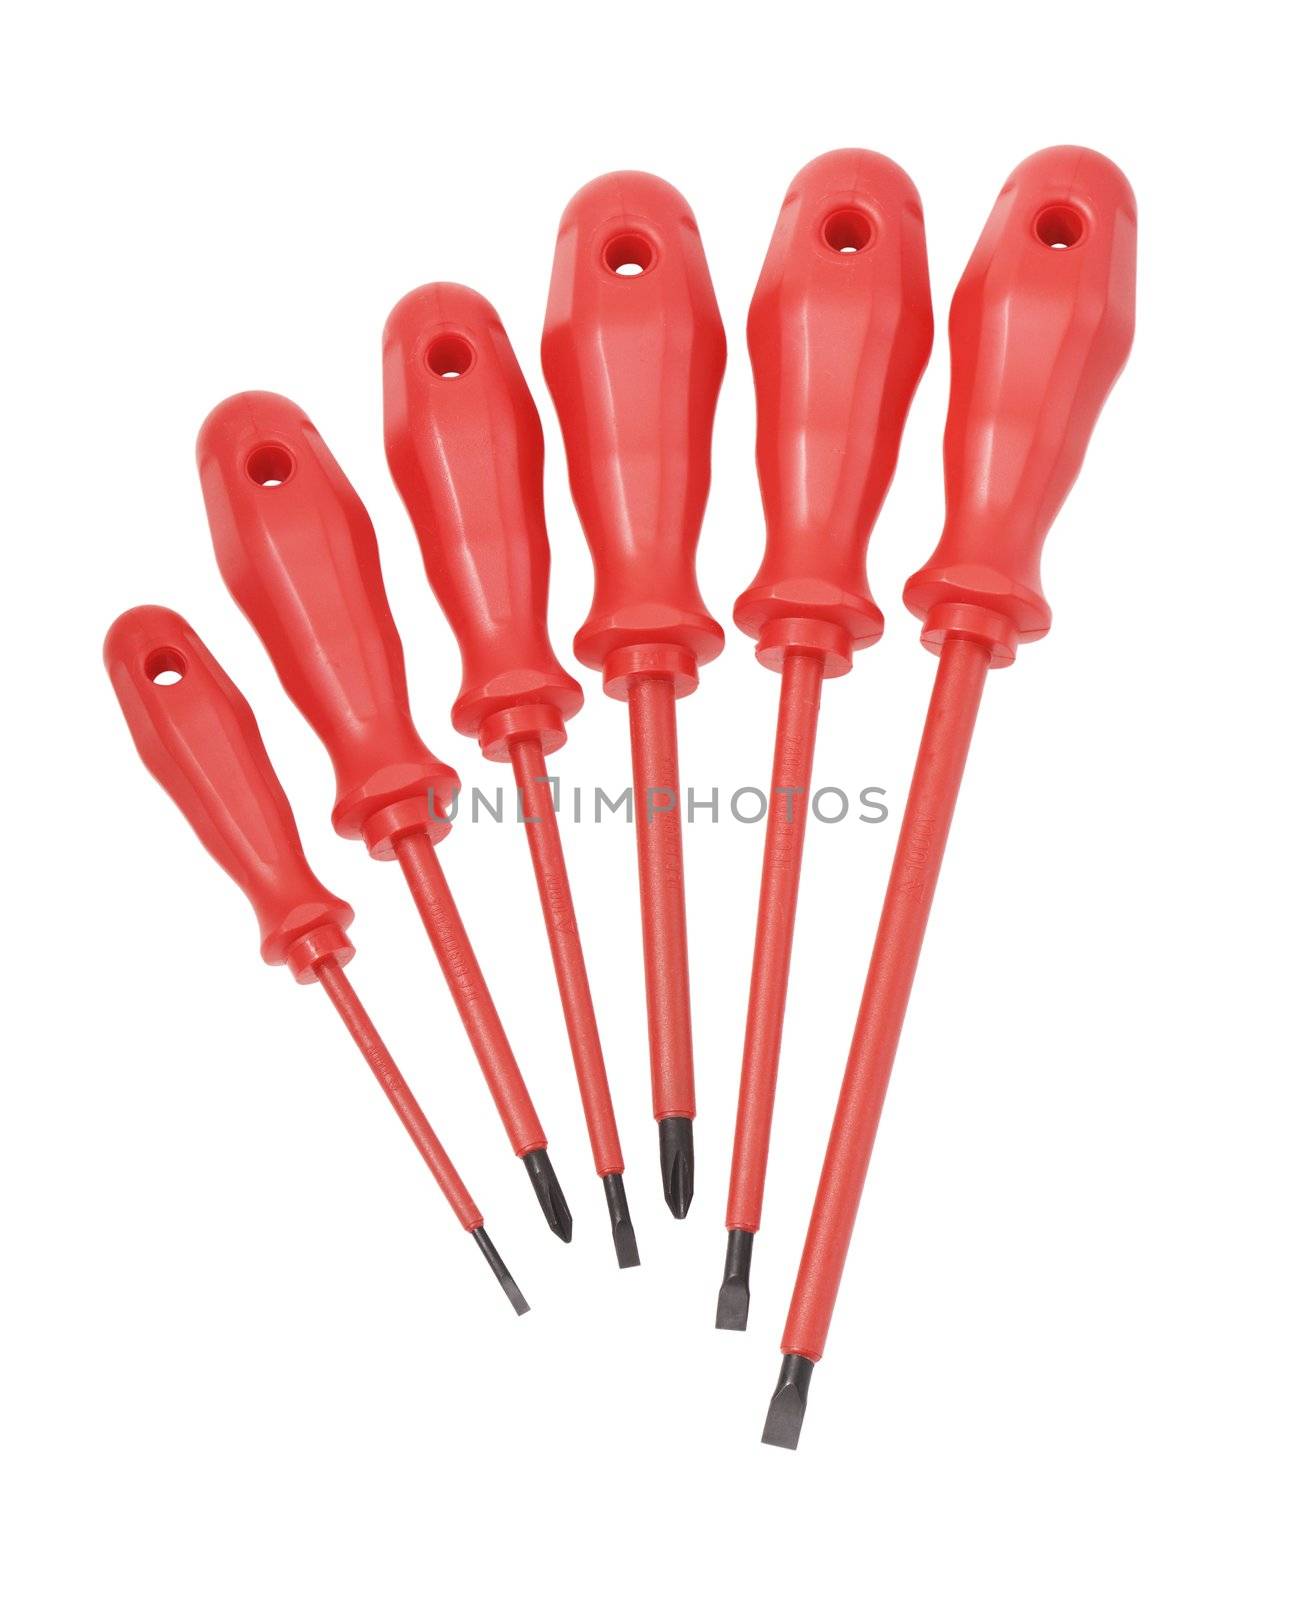 Insulated screwdrivers by Stocksnapper